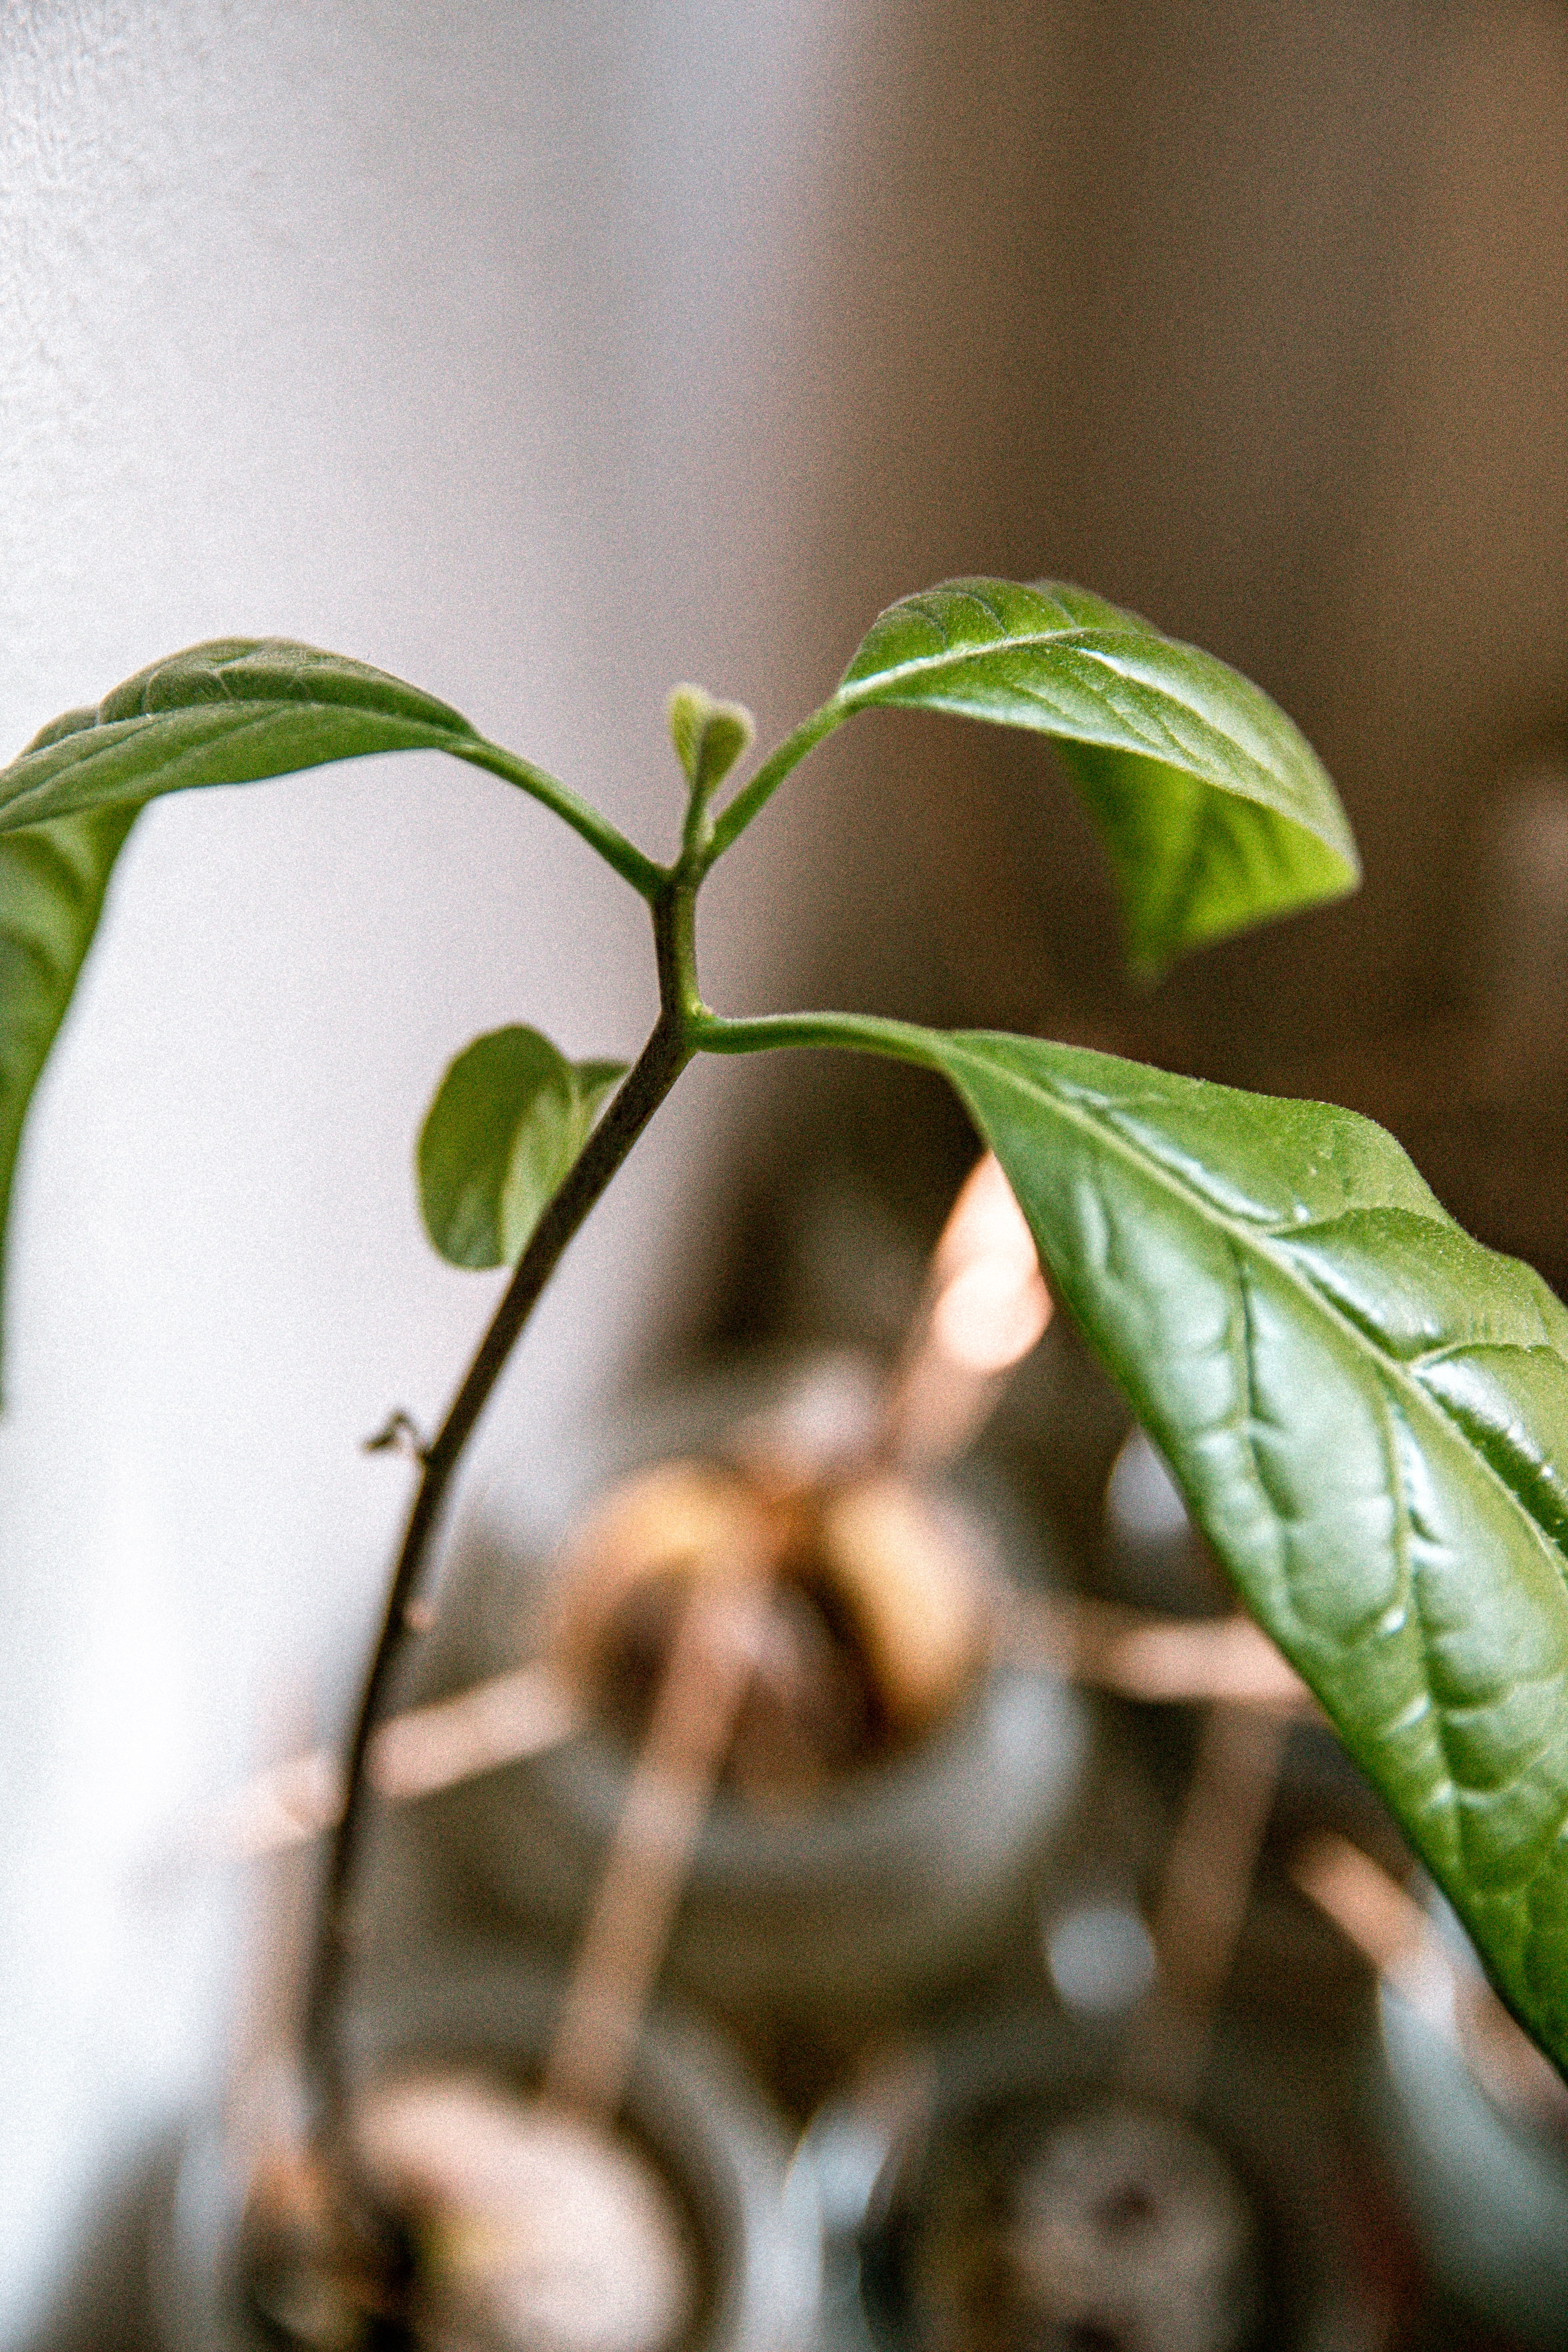 The best way to repot your Avocado plant